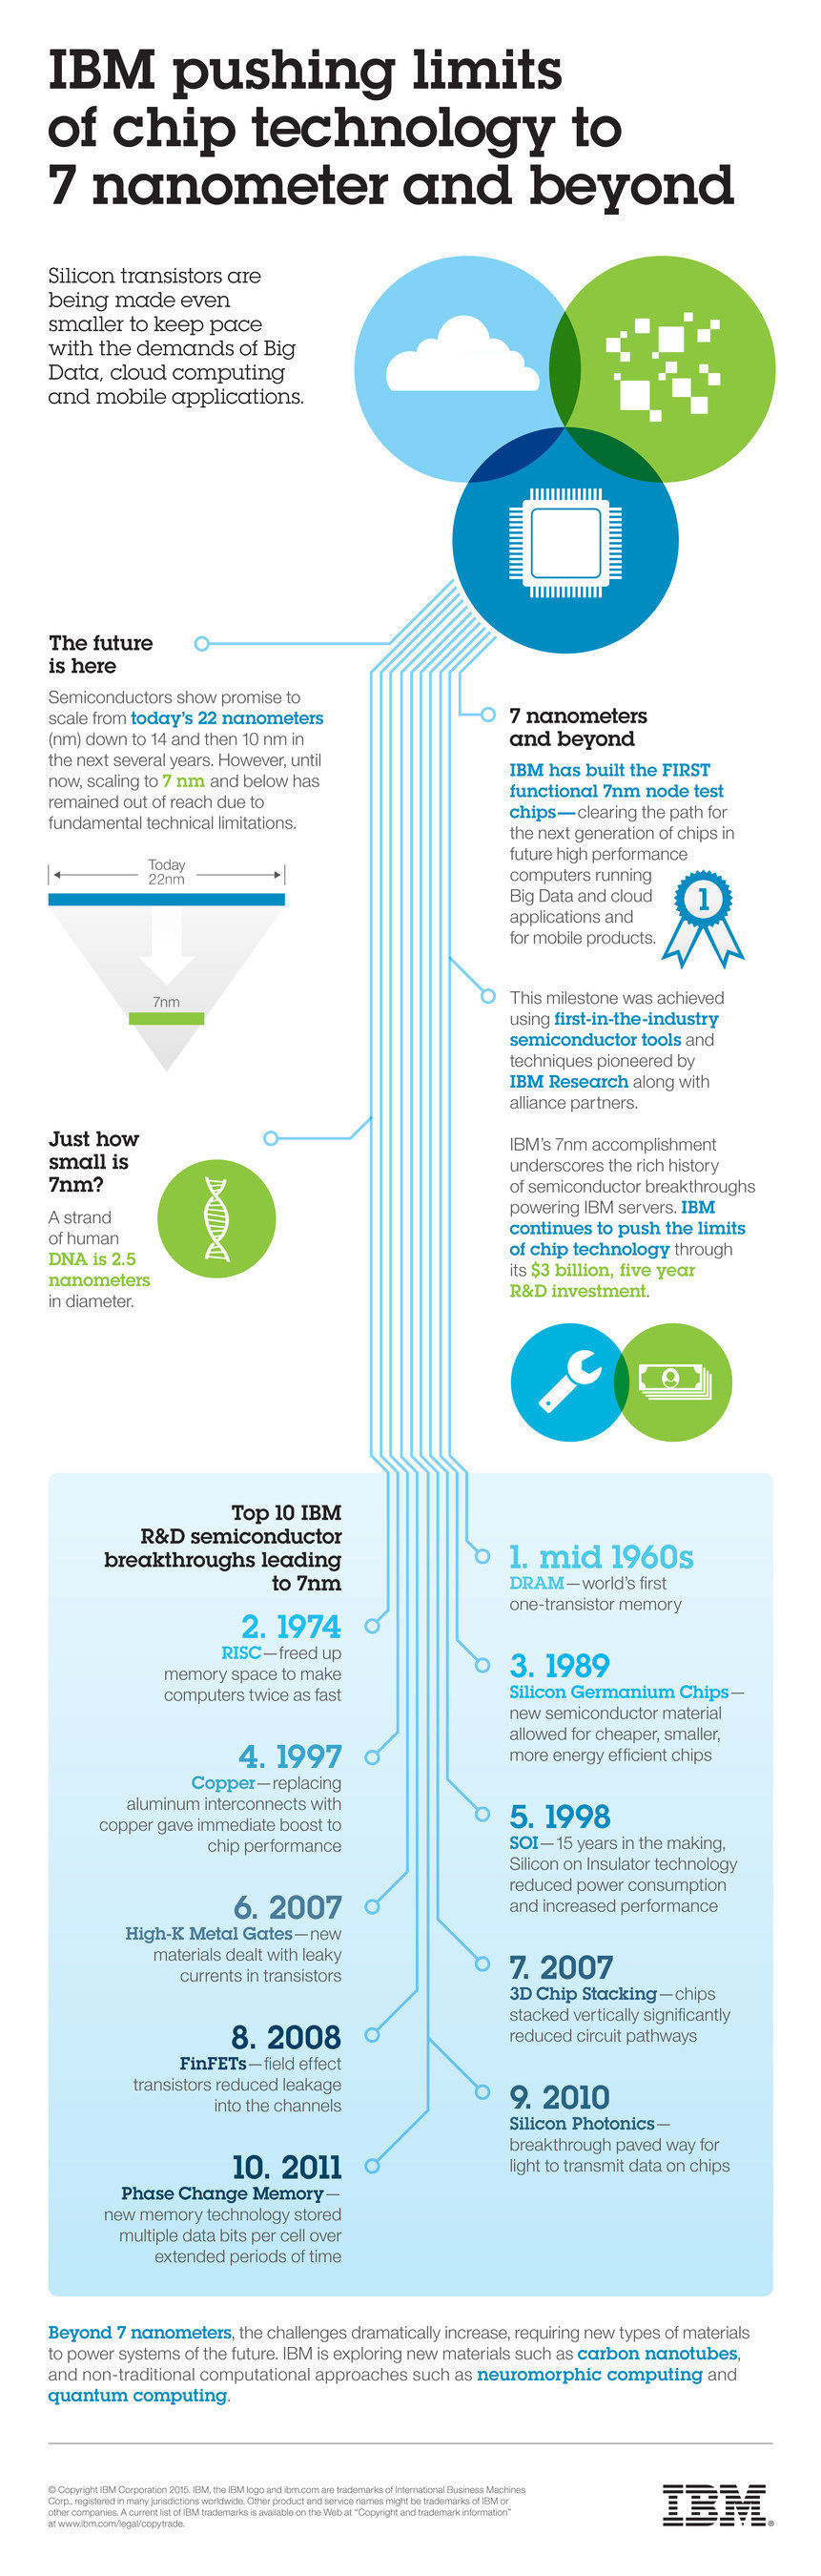 Infographic - IBM Pushing Limits of Chip Technology to 7 nanometer and Beyond